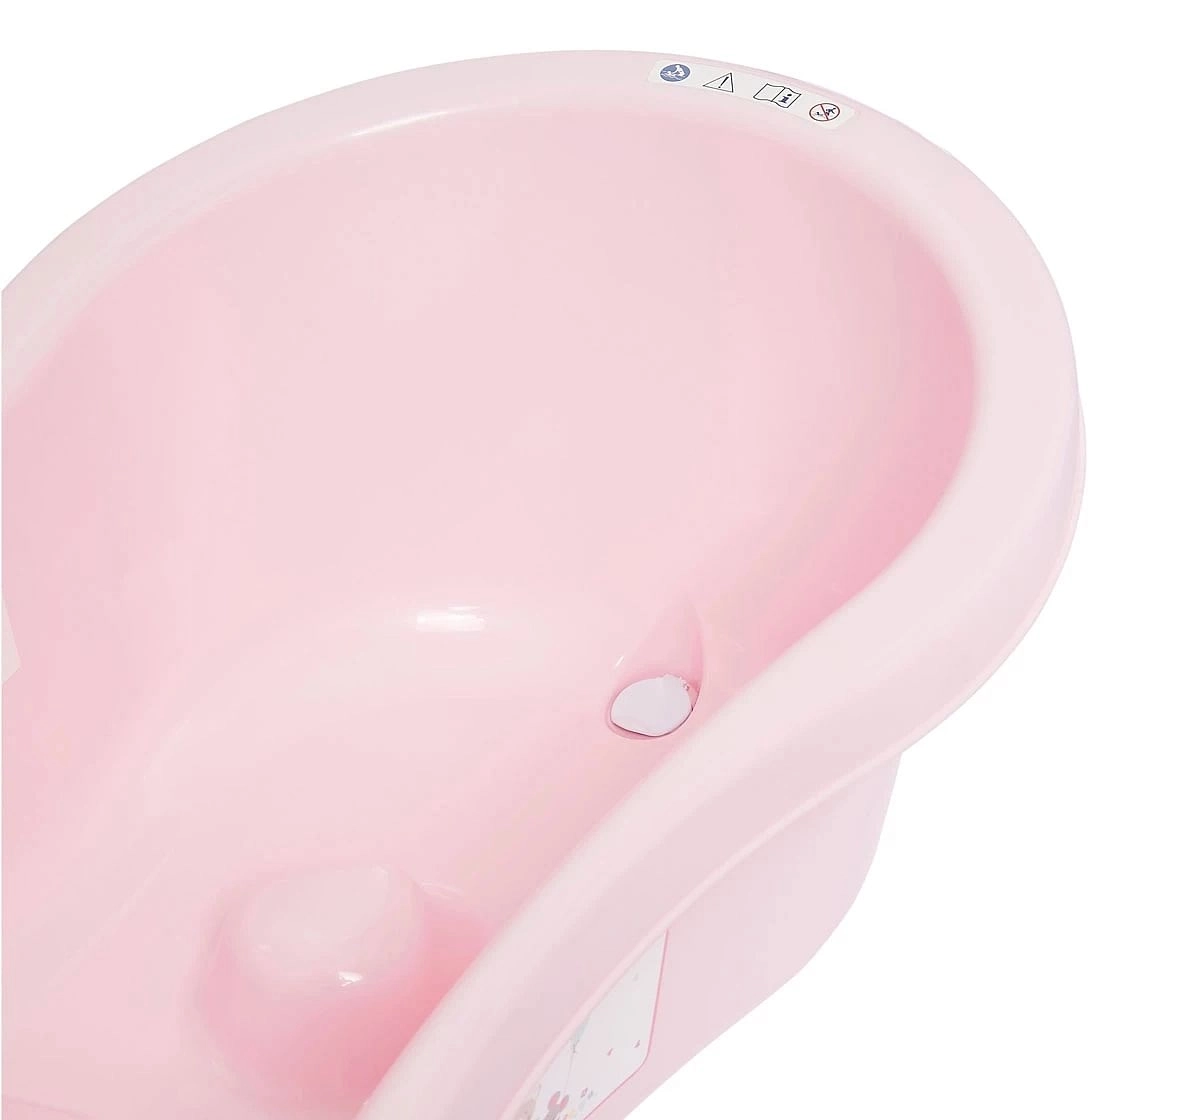 Mothercare Confetti Party Baby Bath Tub Pink